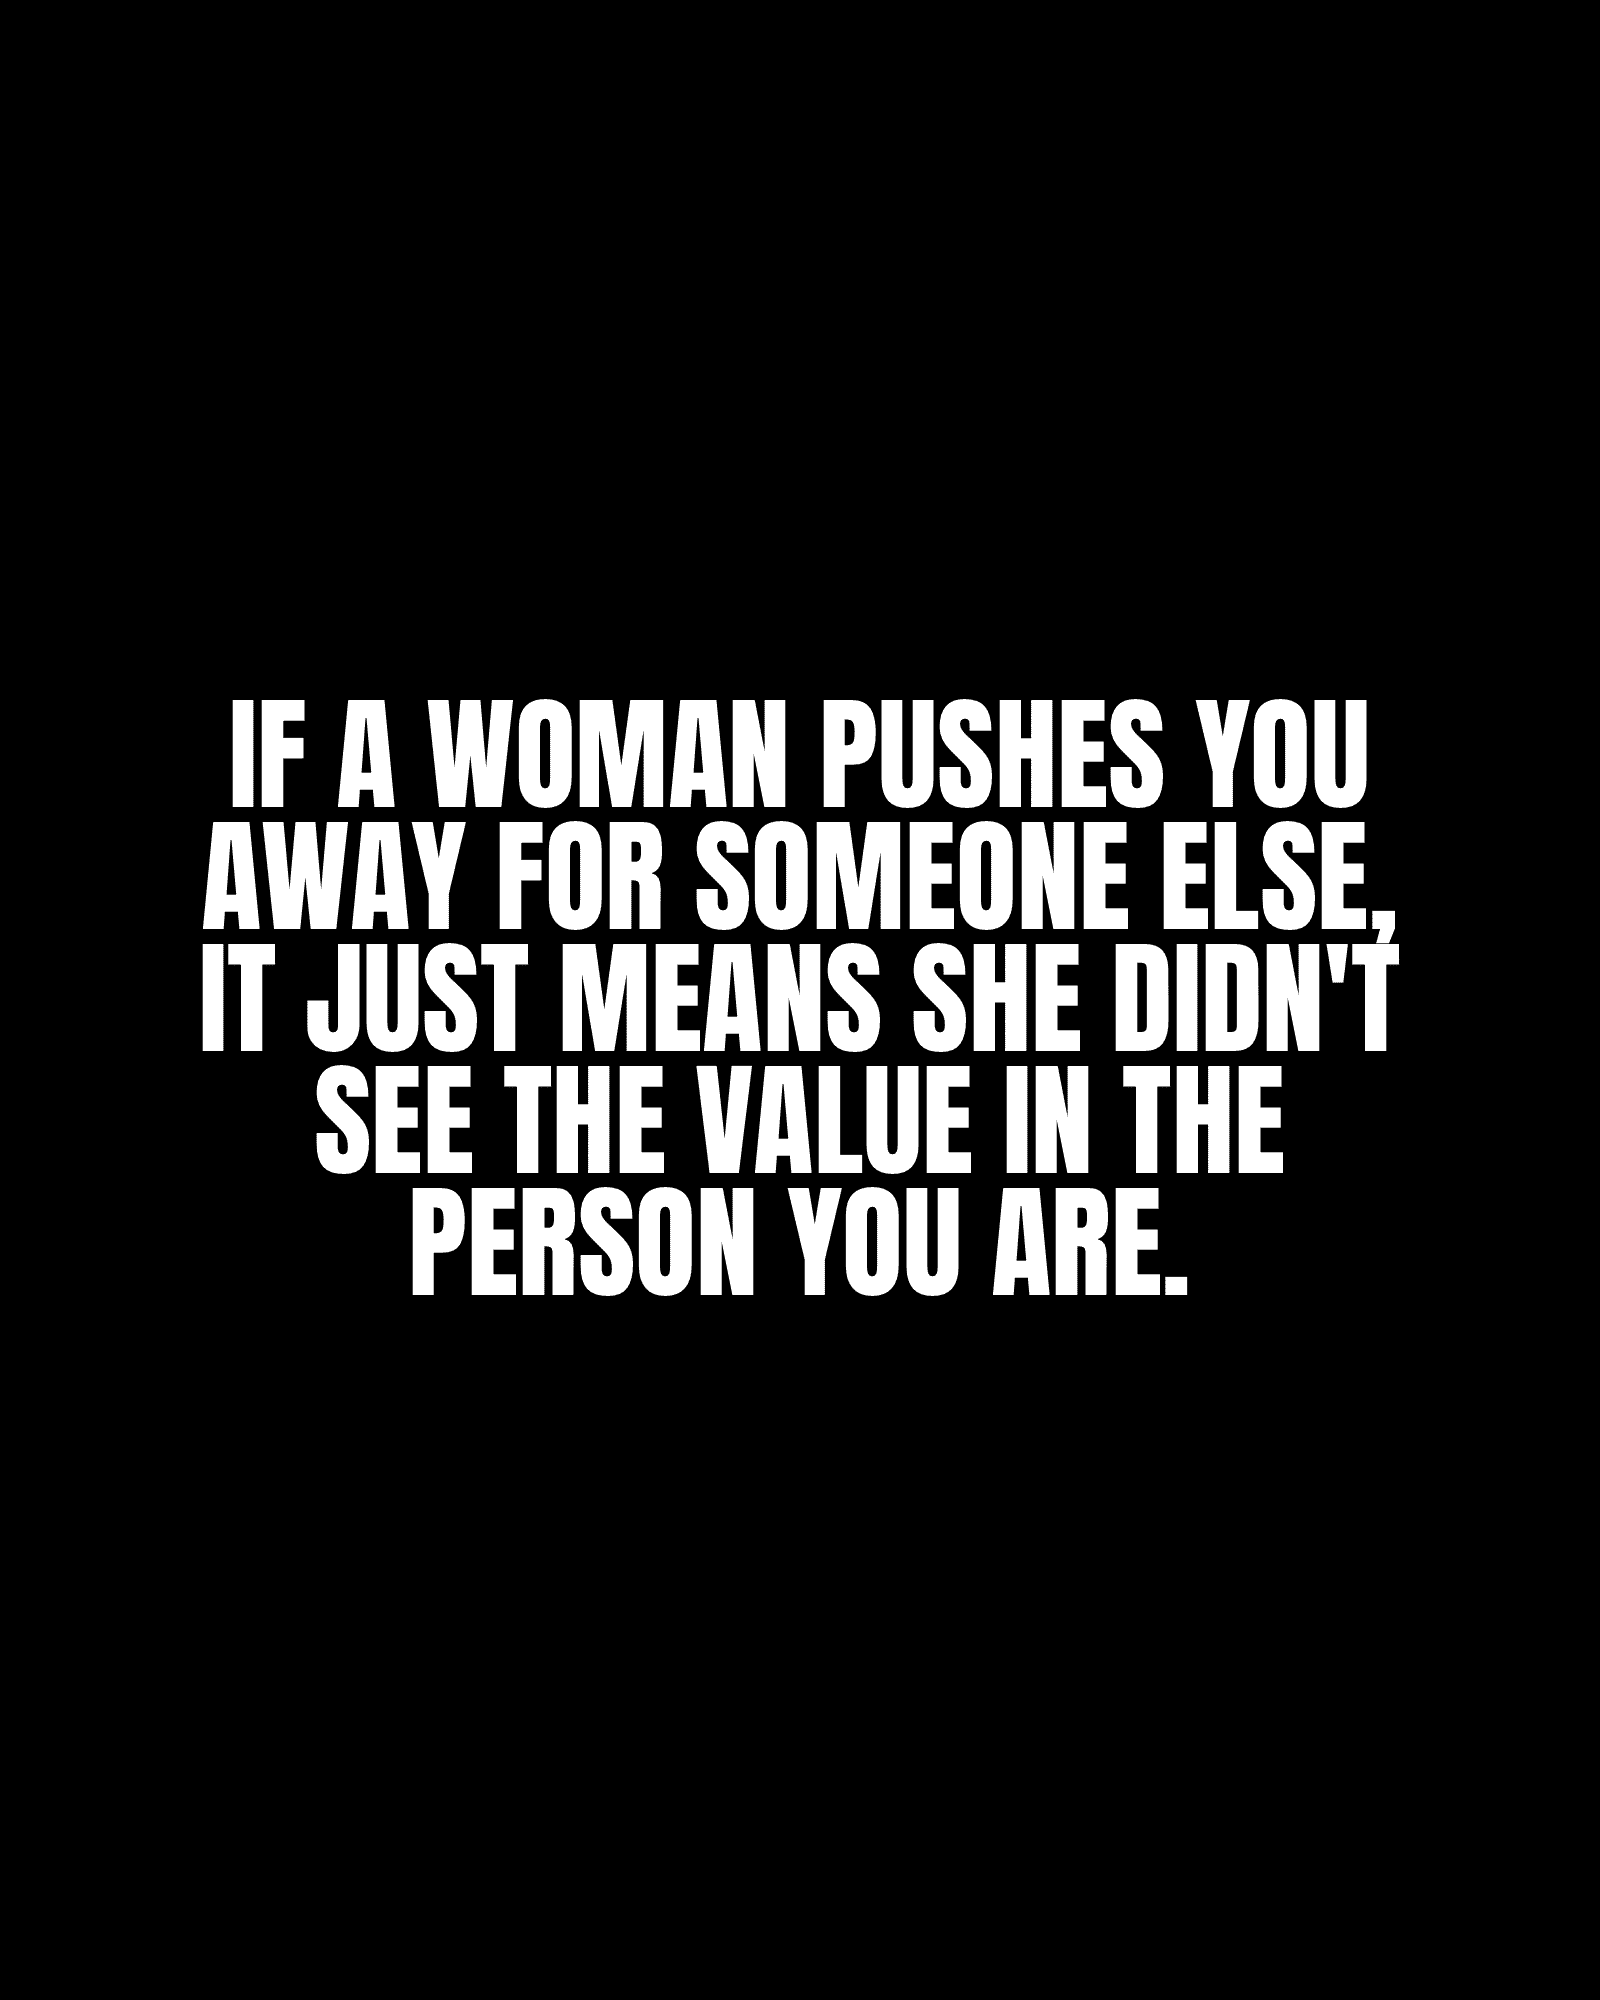 If a woman pushes you away for someone else, it just means she didn’t see the value in the person you are.